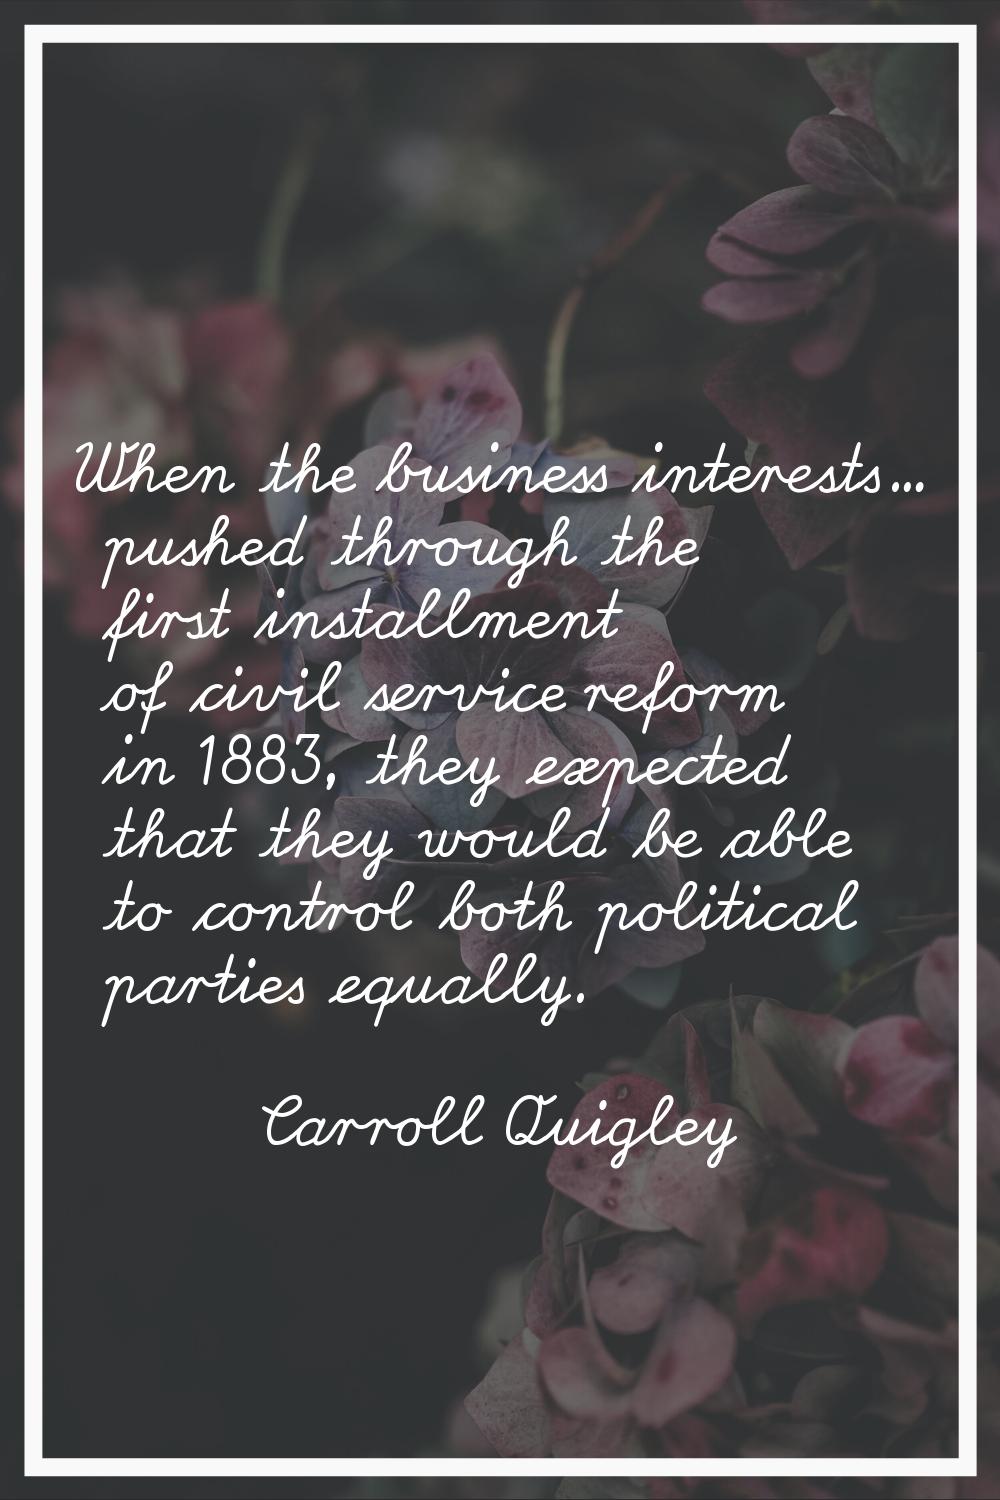 When the business interests... pushed through the first installment of civil service reform in 1883